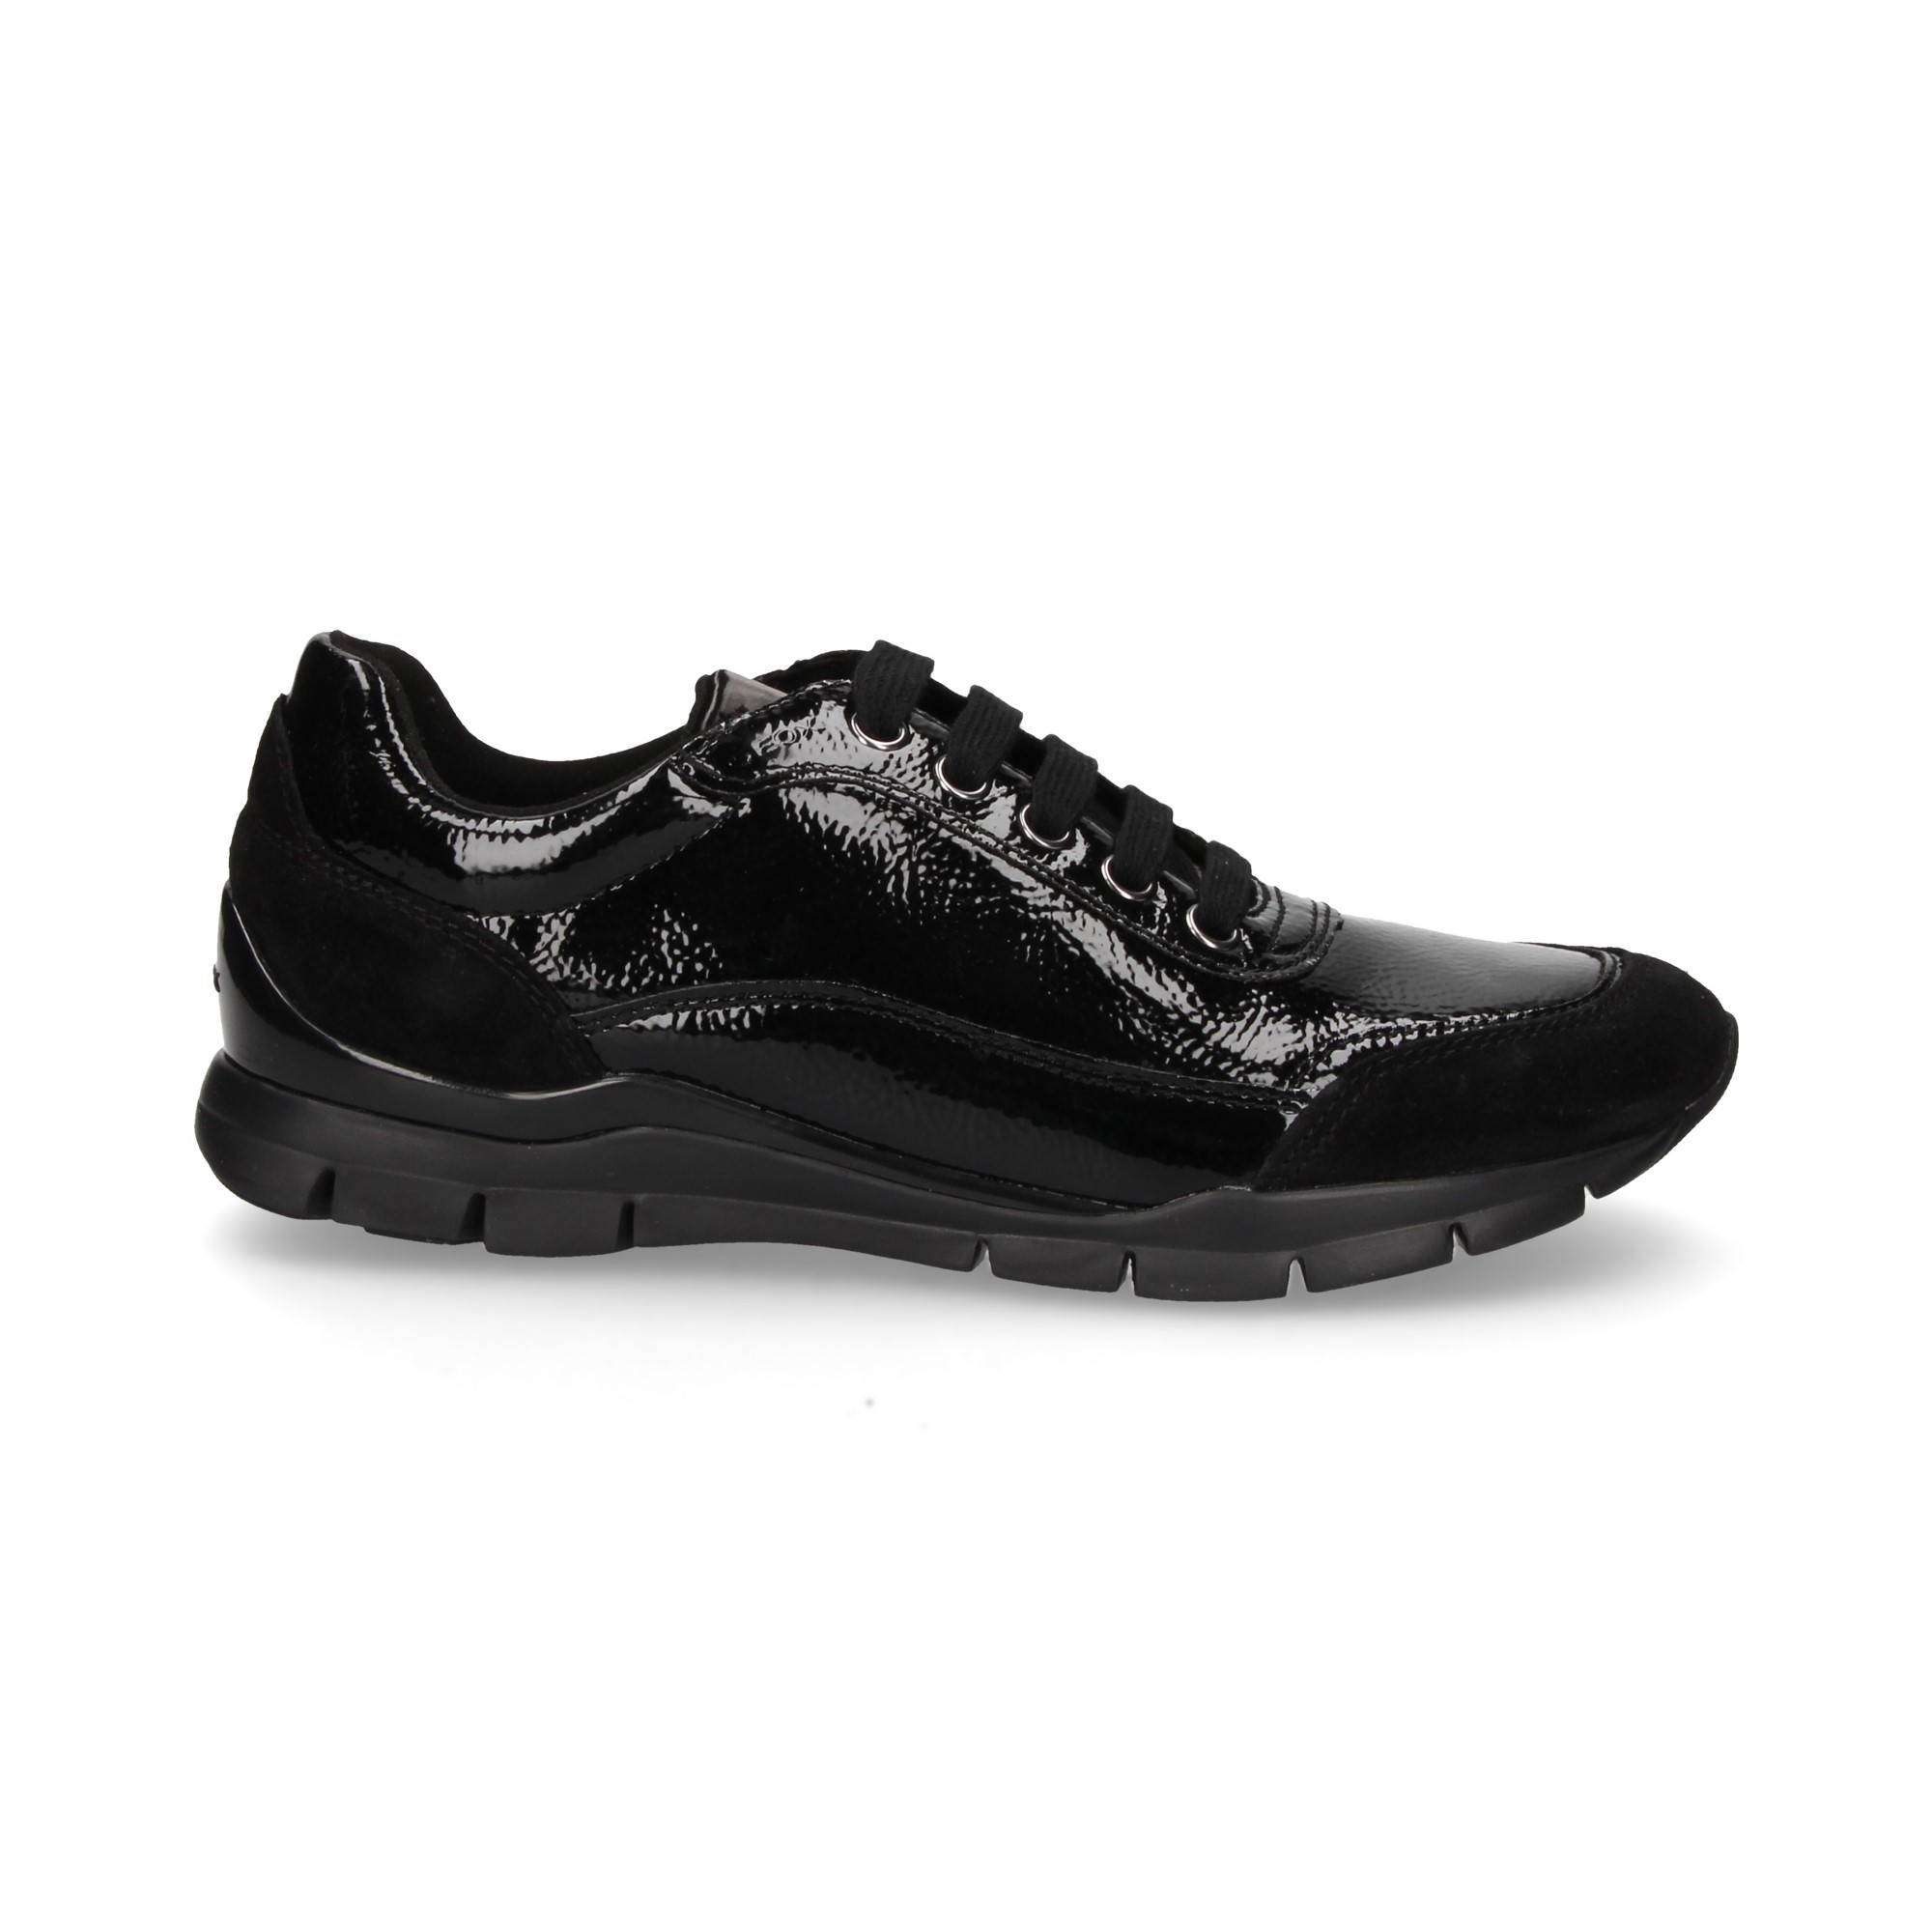 sporty-black-patent-leather-cord